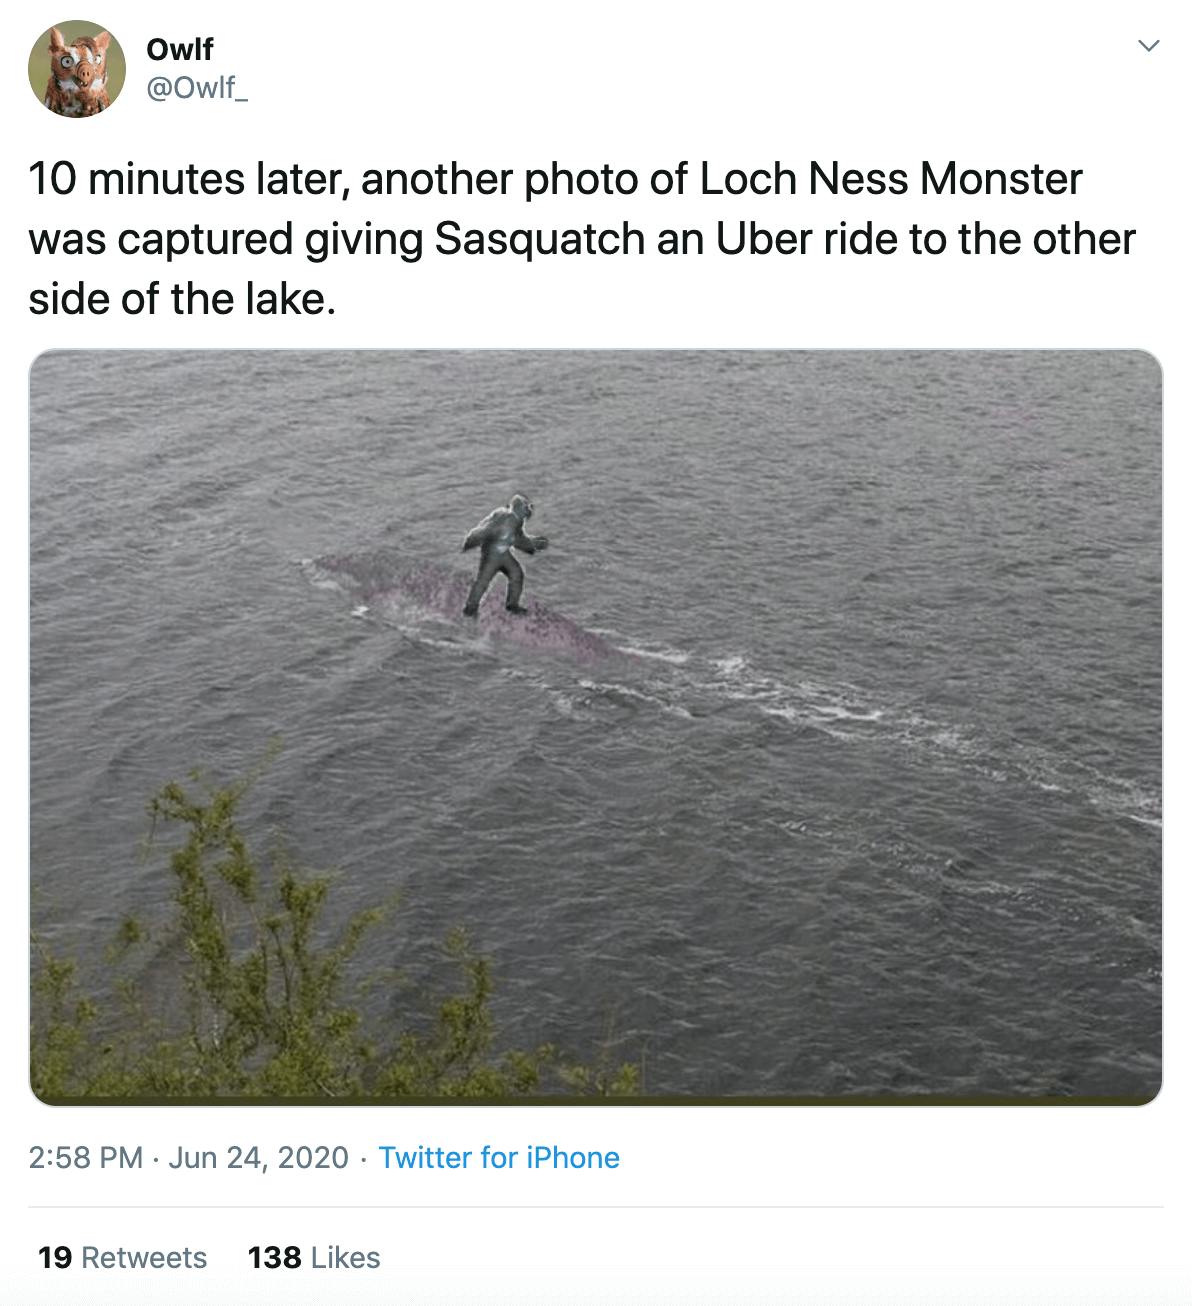 "10 minutes later, another photo of Loch Ness Monster was captured giving Sasquatch an Uber ride to the other side of the lake." picture of Sasquatch riding Nessie